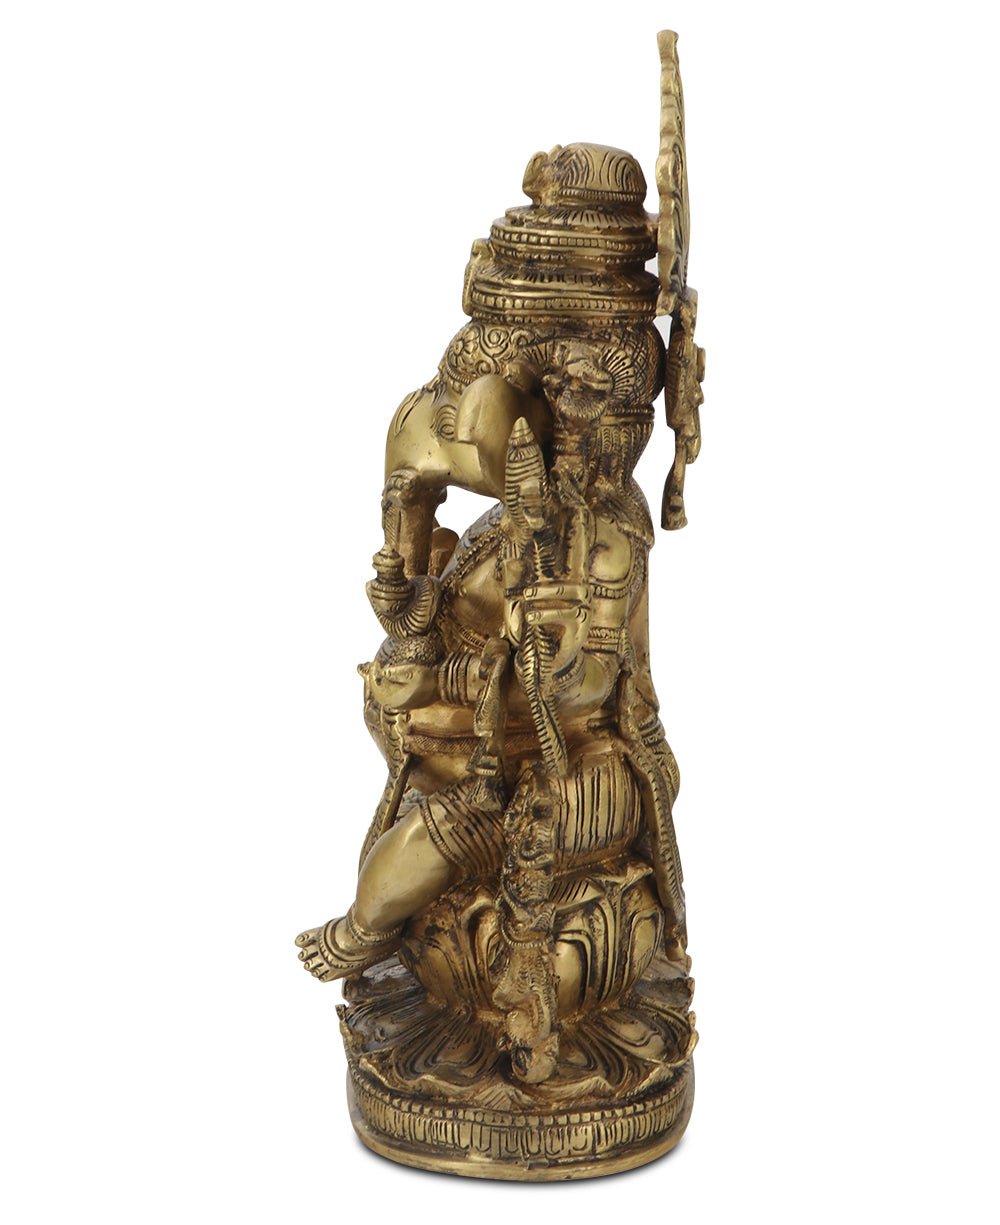 Intricate Brass Ganesh Statue, 14.5 Inches High - Sculptures & Statues